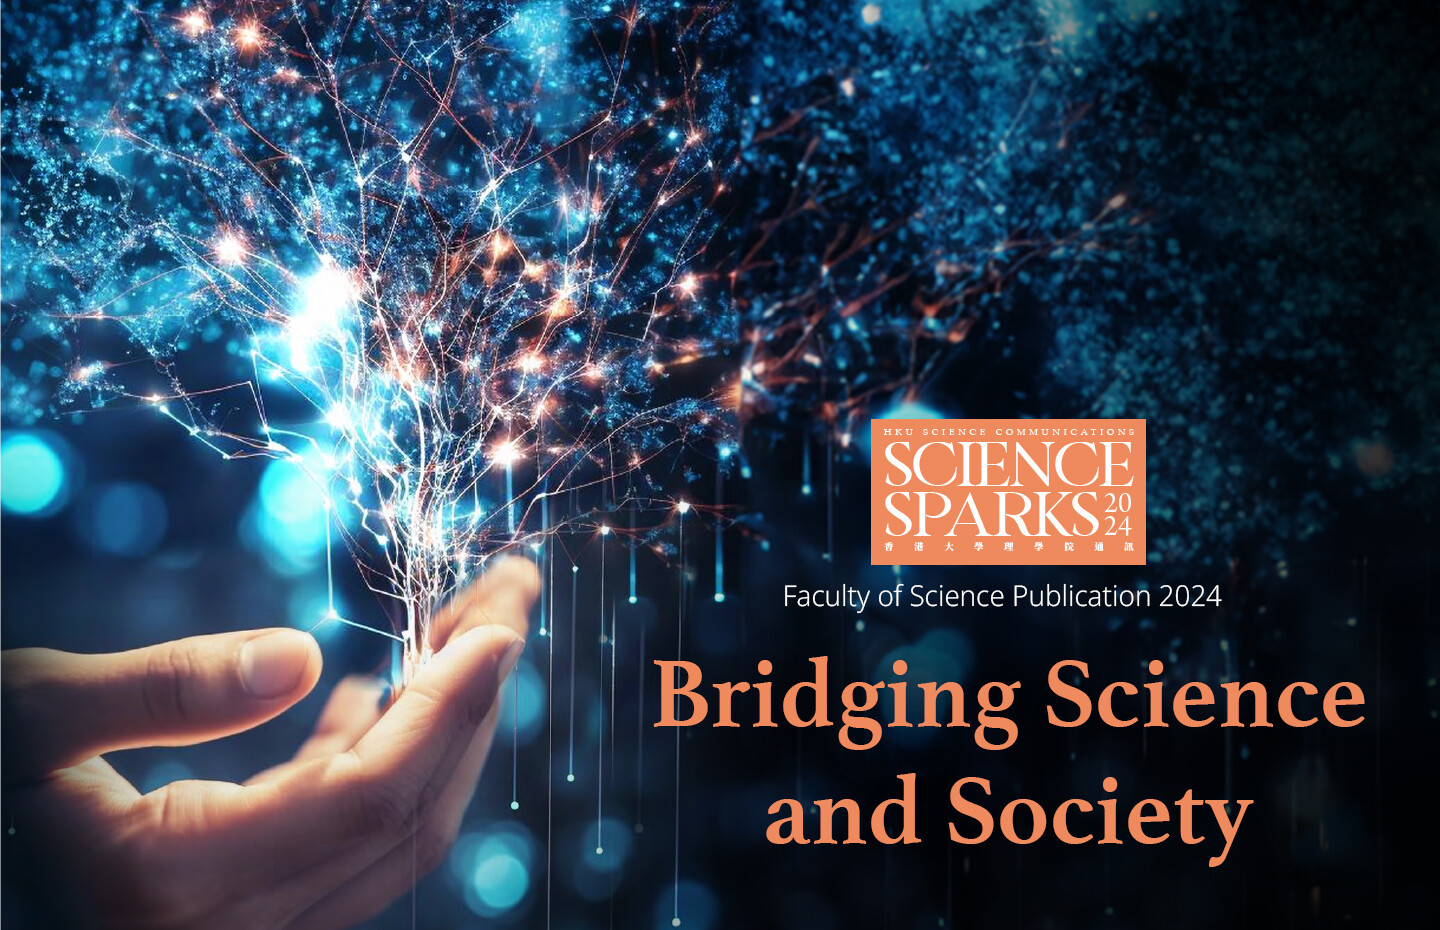 Science Sparks 2024: Bridging Science and Society